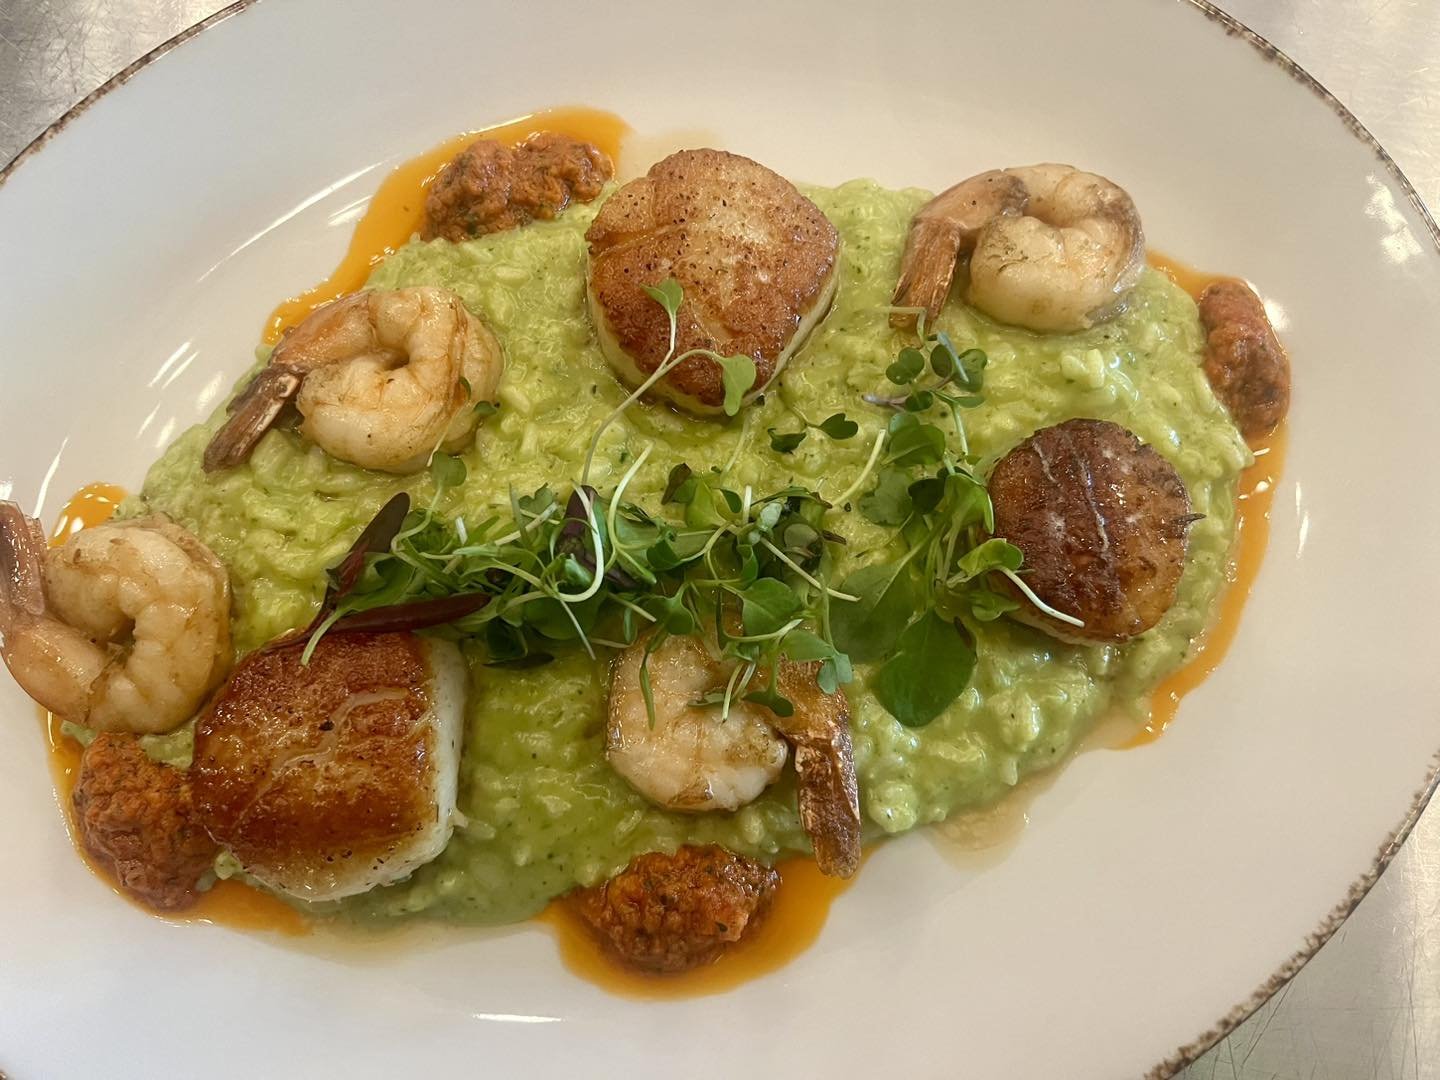 Don&rsquo;t miss this evening and tomorrow&rsquo;s feature: Pan-Seared Shrimp and Scallops on a bed of Roasted Poblano Risotto finished with a Sun-Dried Tomato Chimichurri.